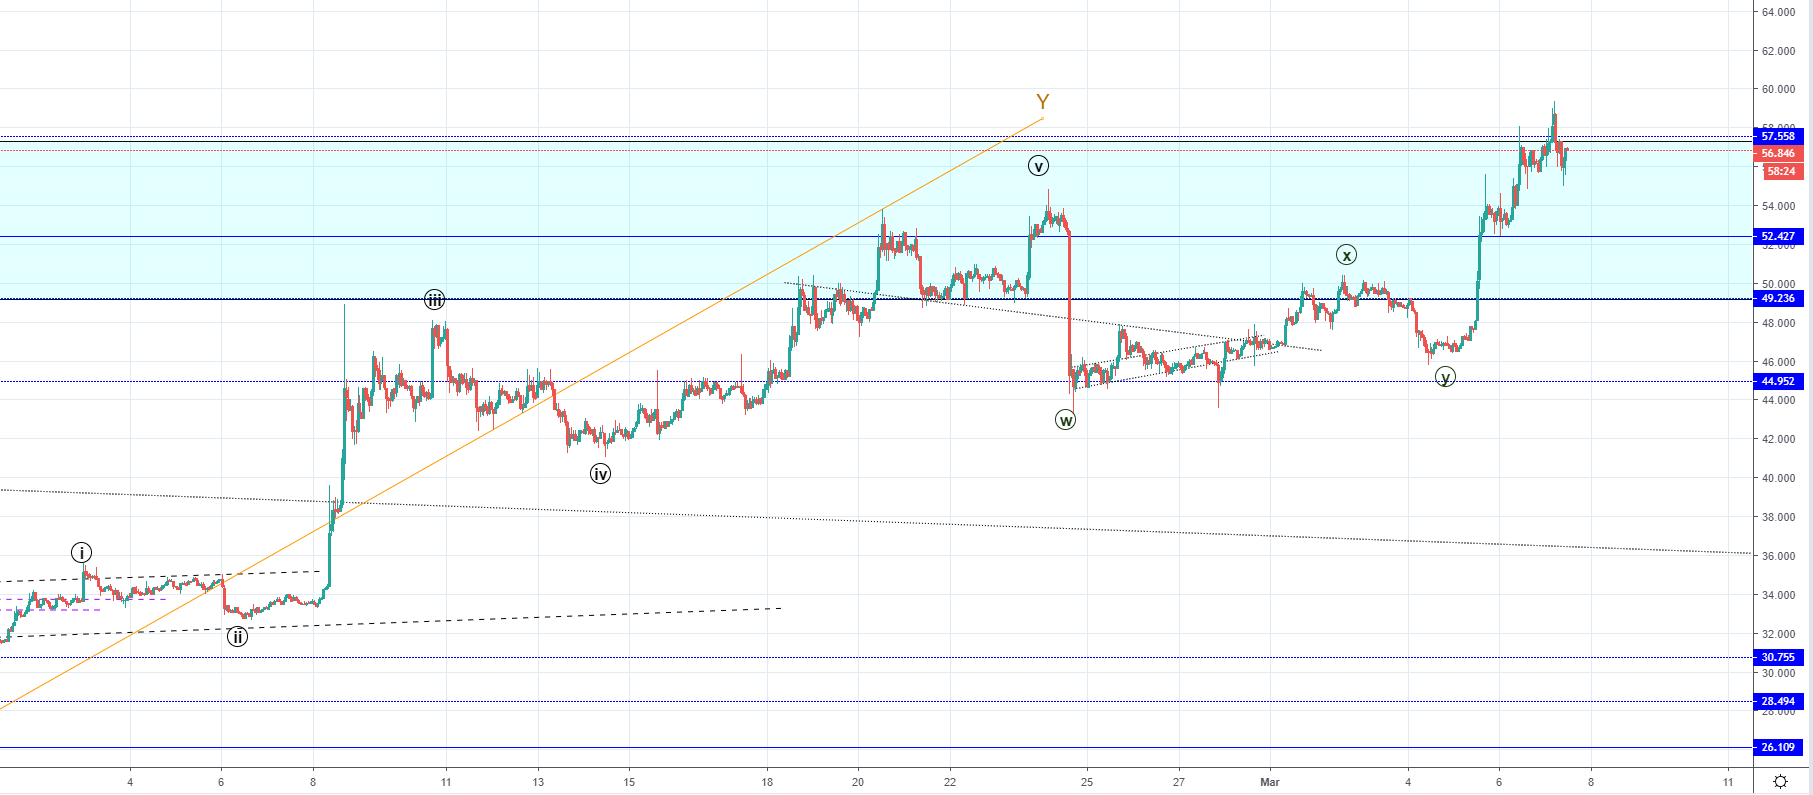 LTC/USD, EOS/USD - one more high before a retracement